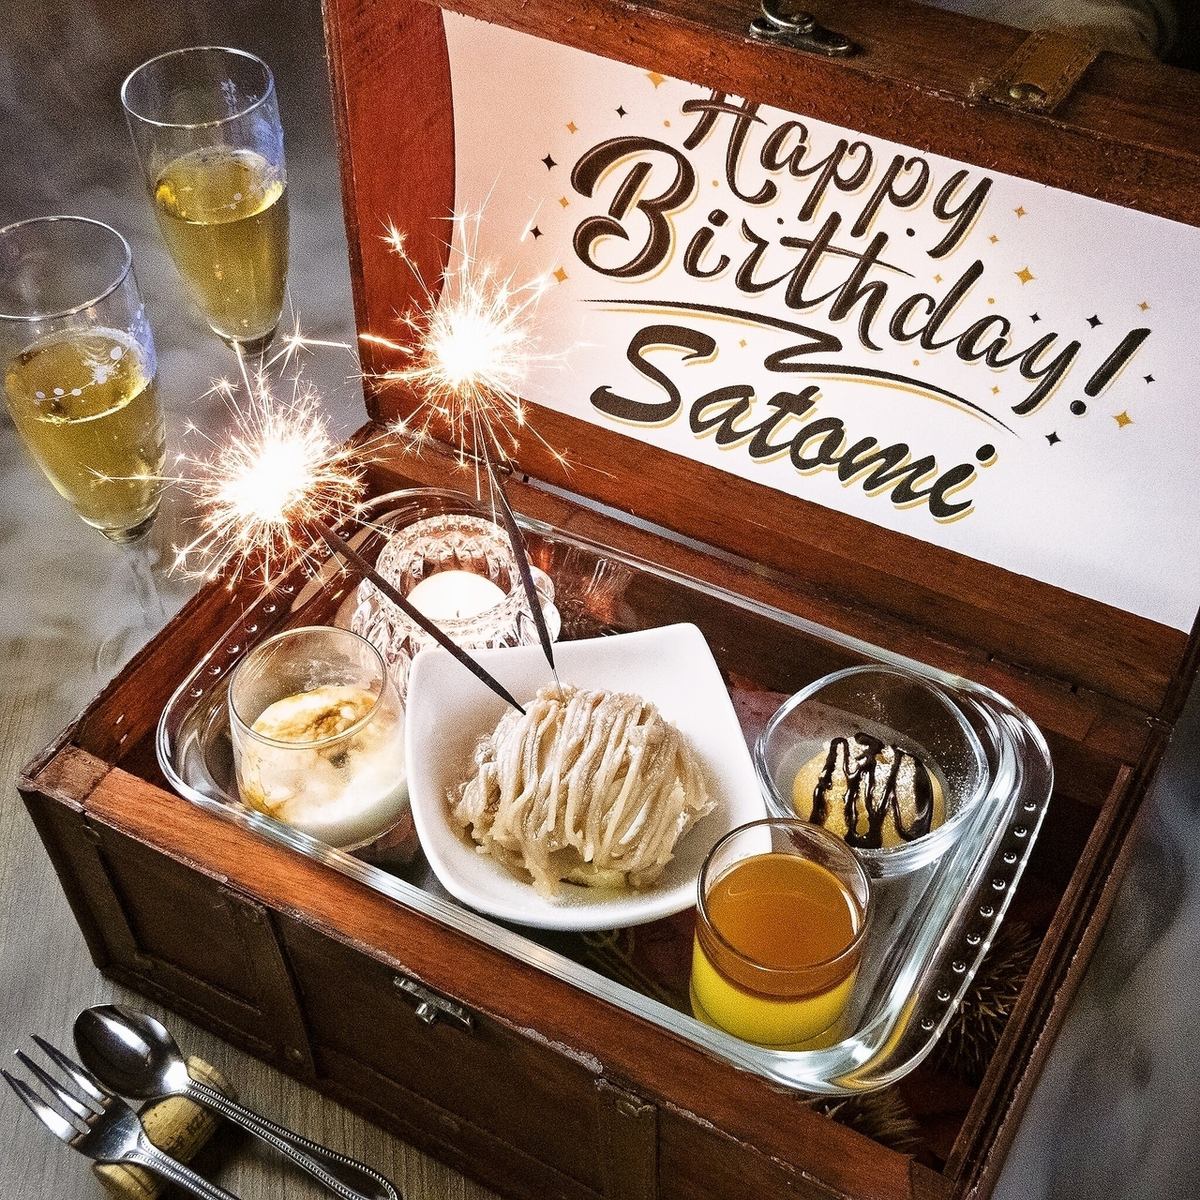 For birthdays and anniversaries ◎Special dessert plates with messages are available♪